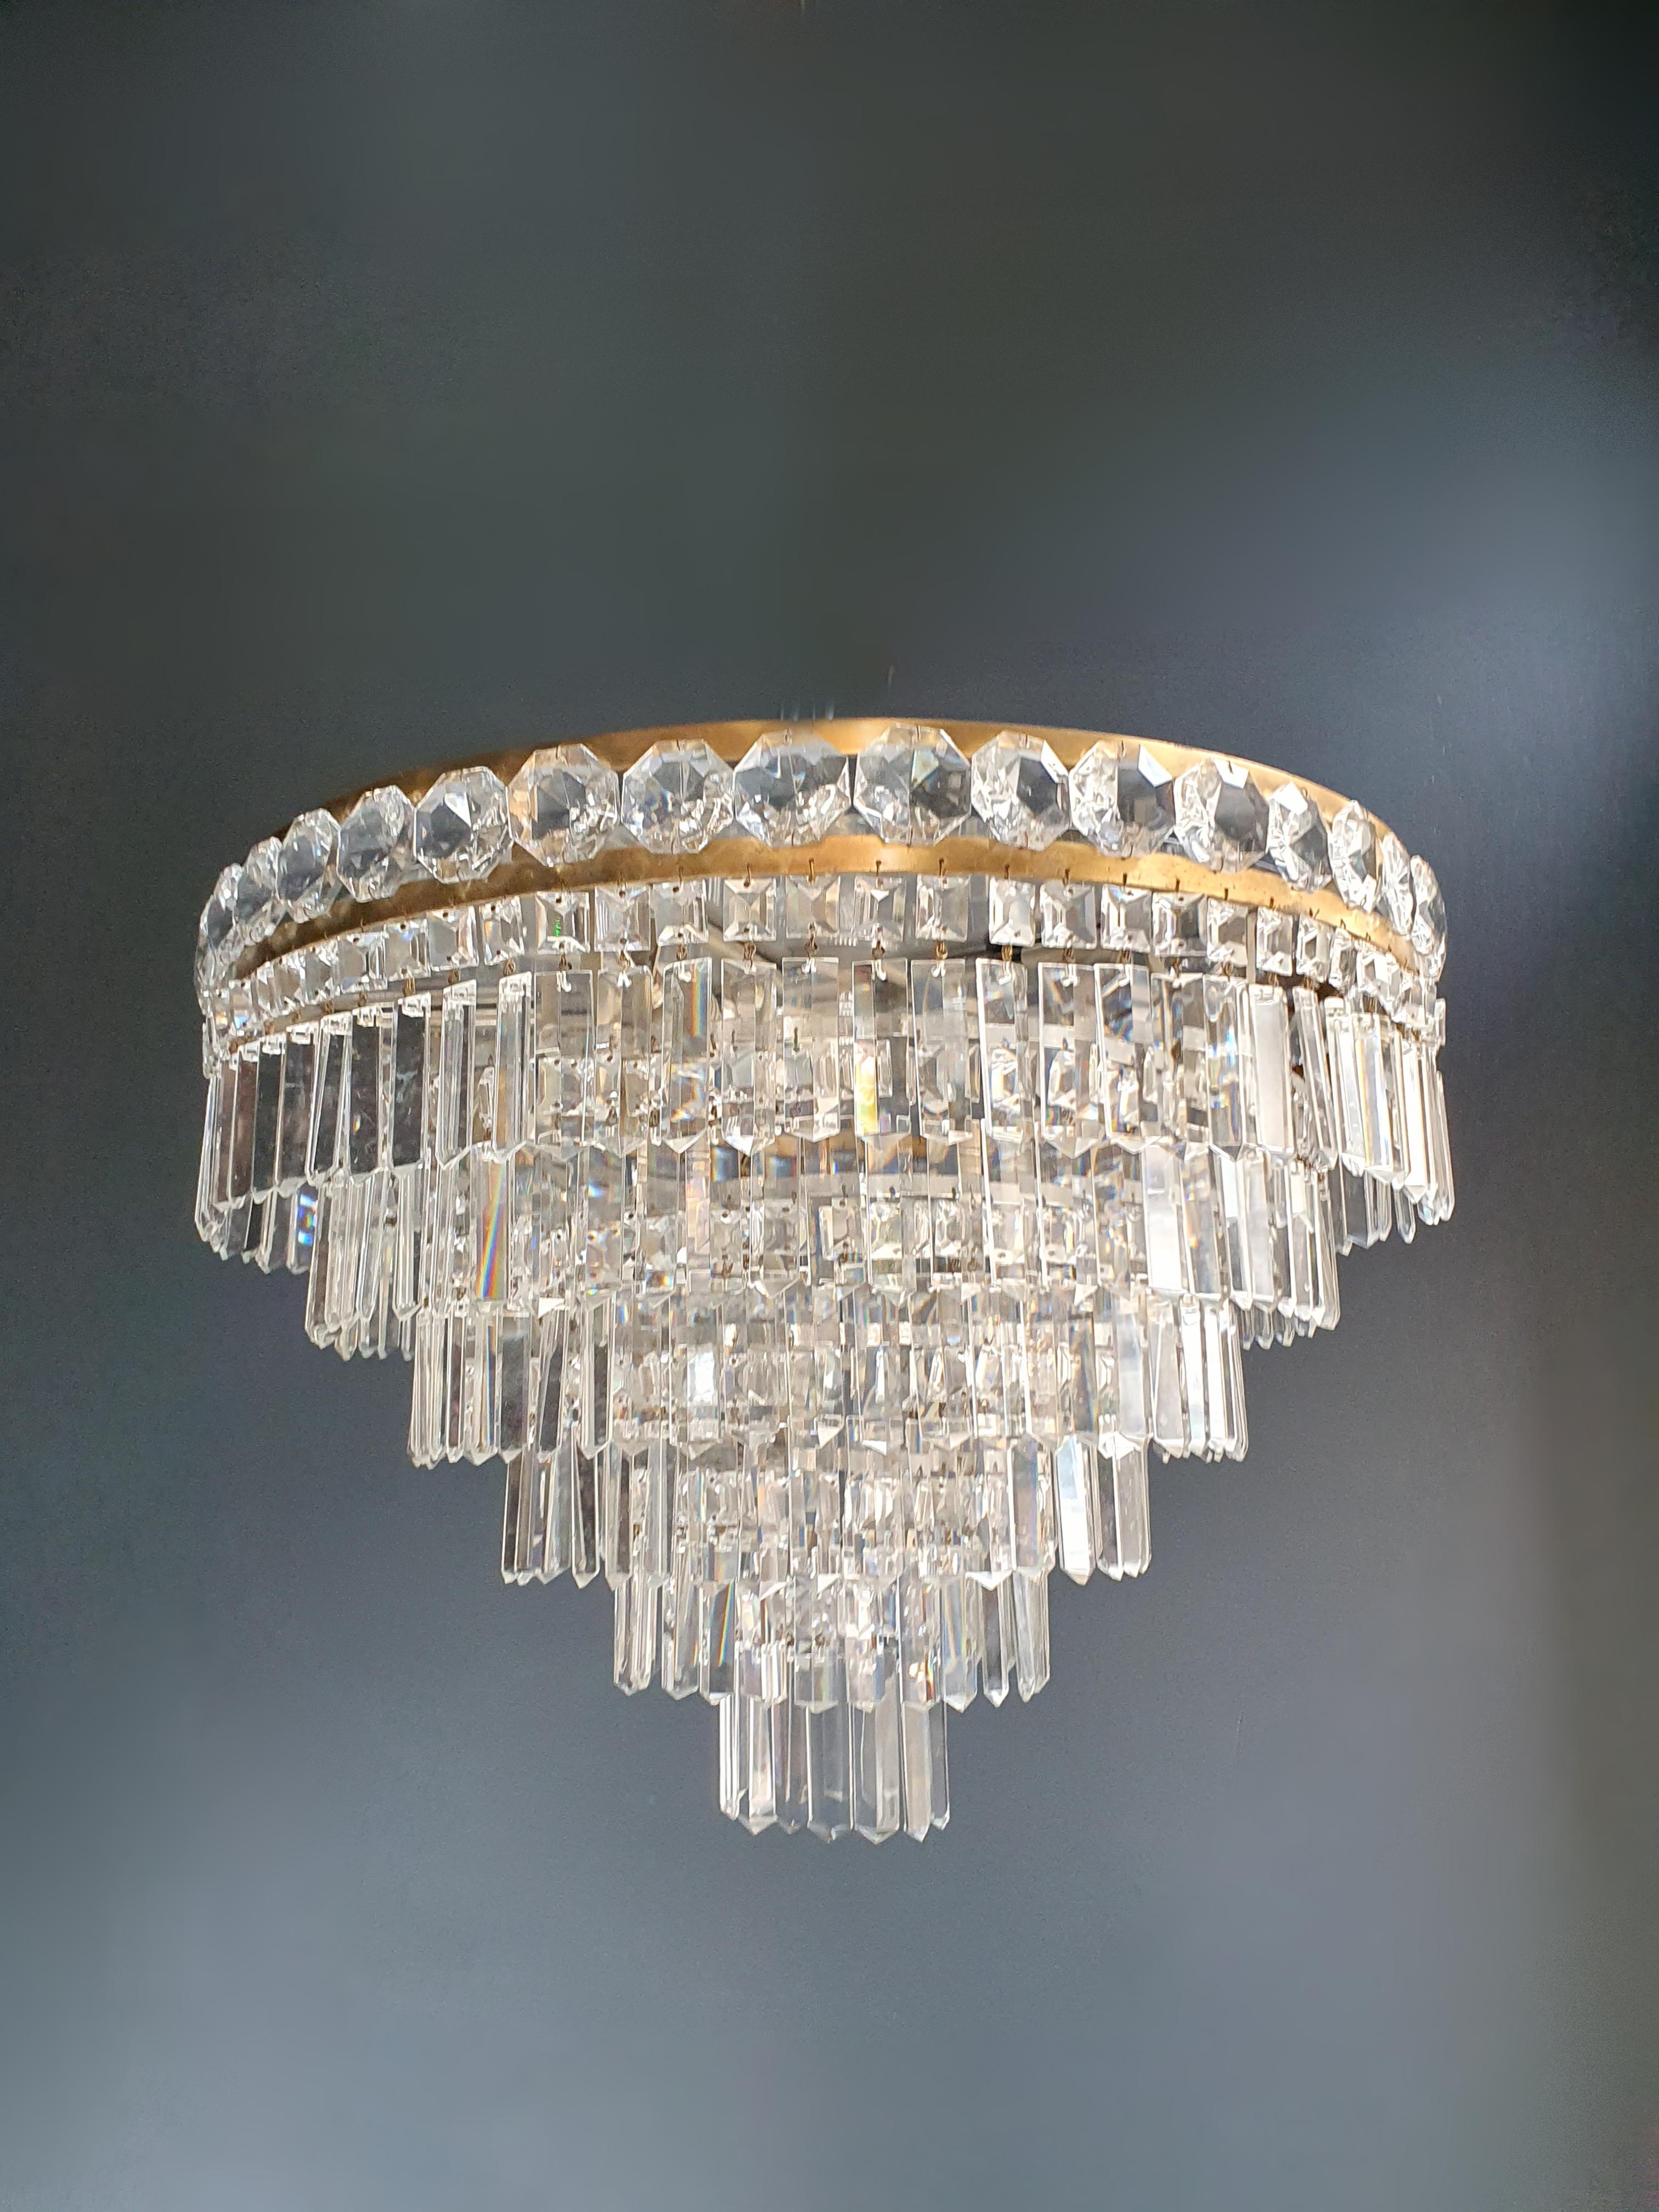 Hand-Knotted Art Deco Low Plafonnier Brass Crystal Chandelier Lustre Ceiling Lamp Antique